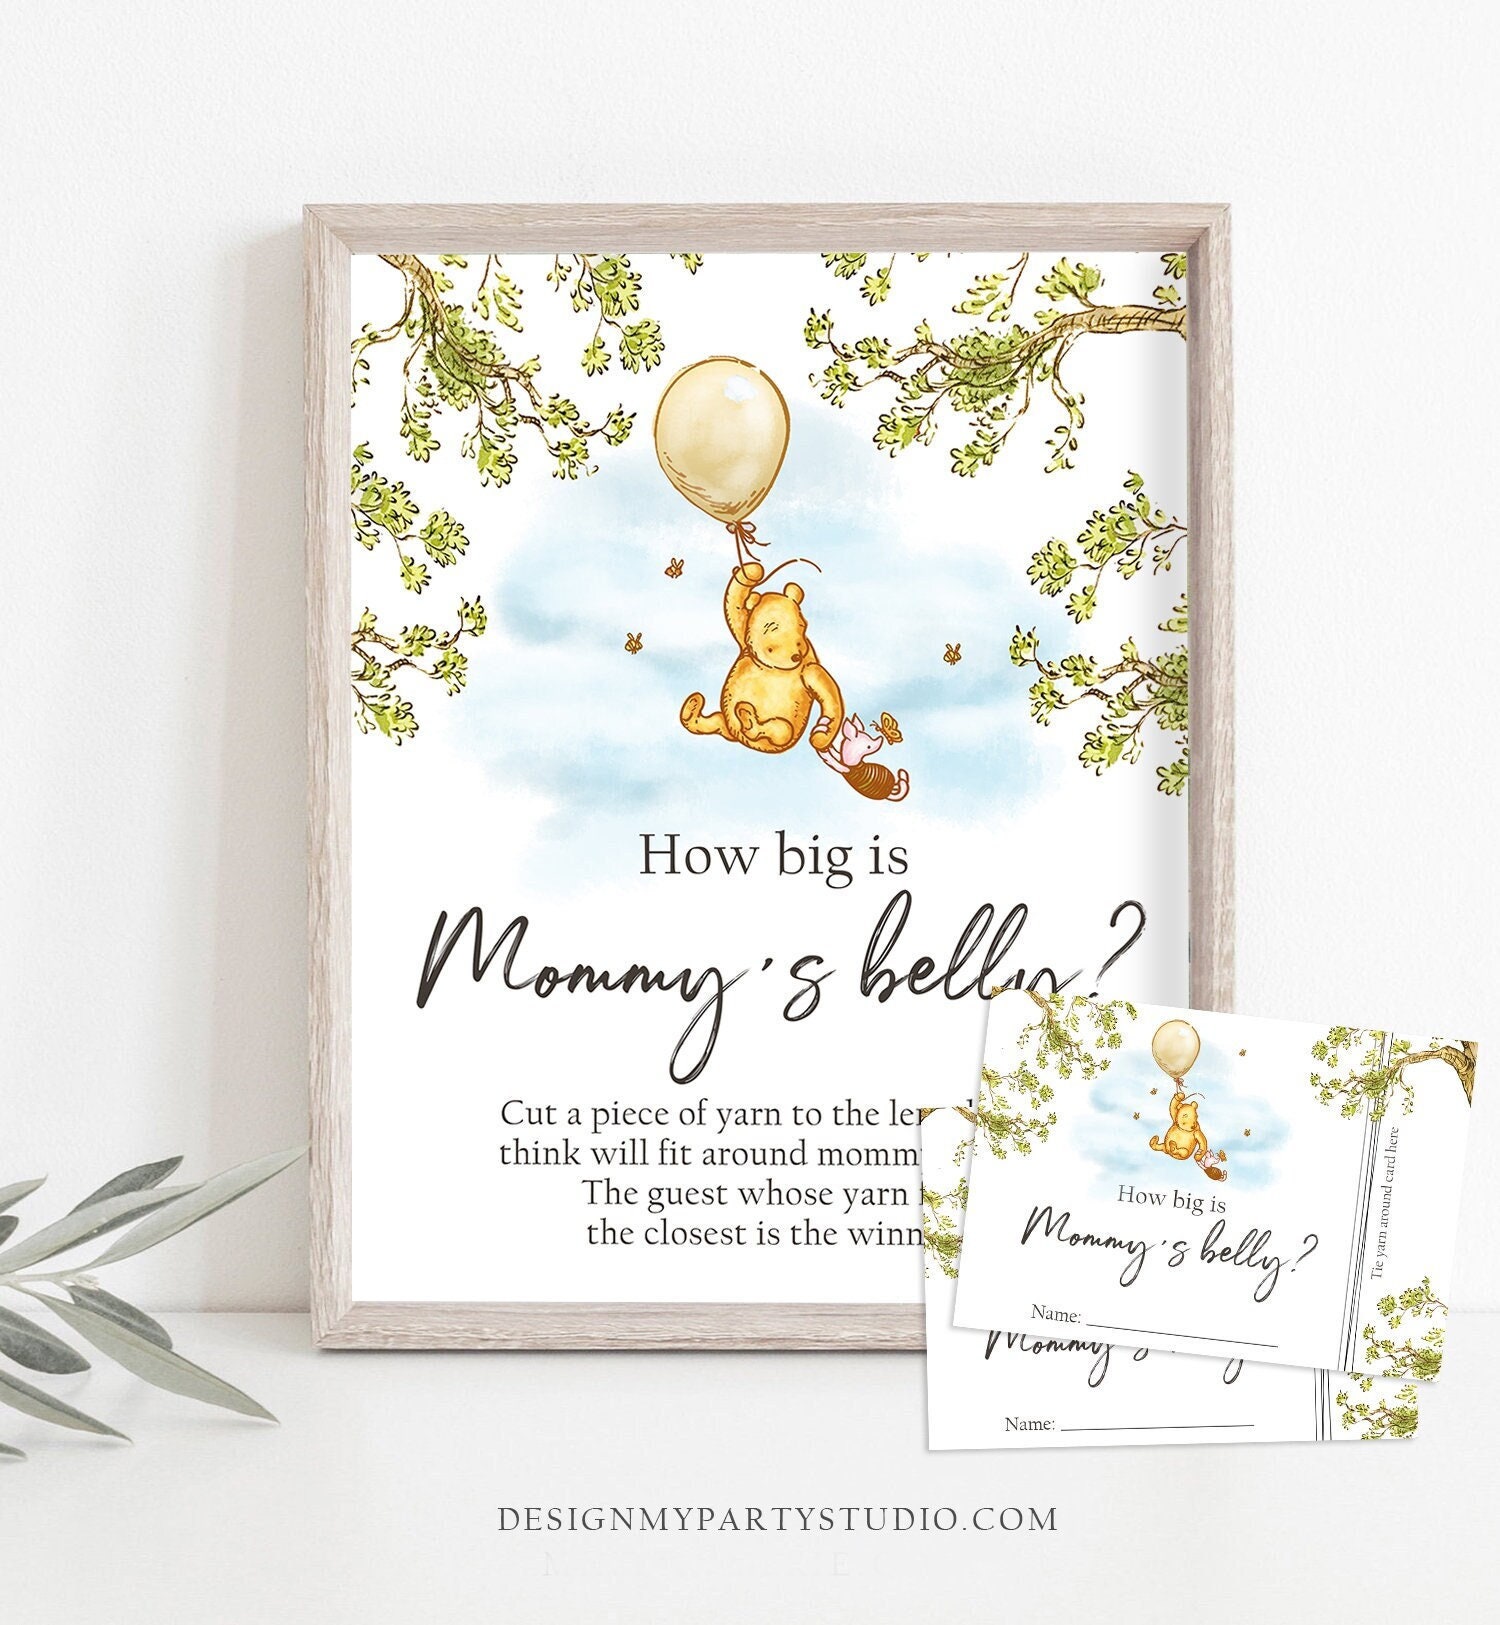 Classic Winnie The Pooh Baby Shower Games - Guess Who Mommy Or